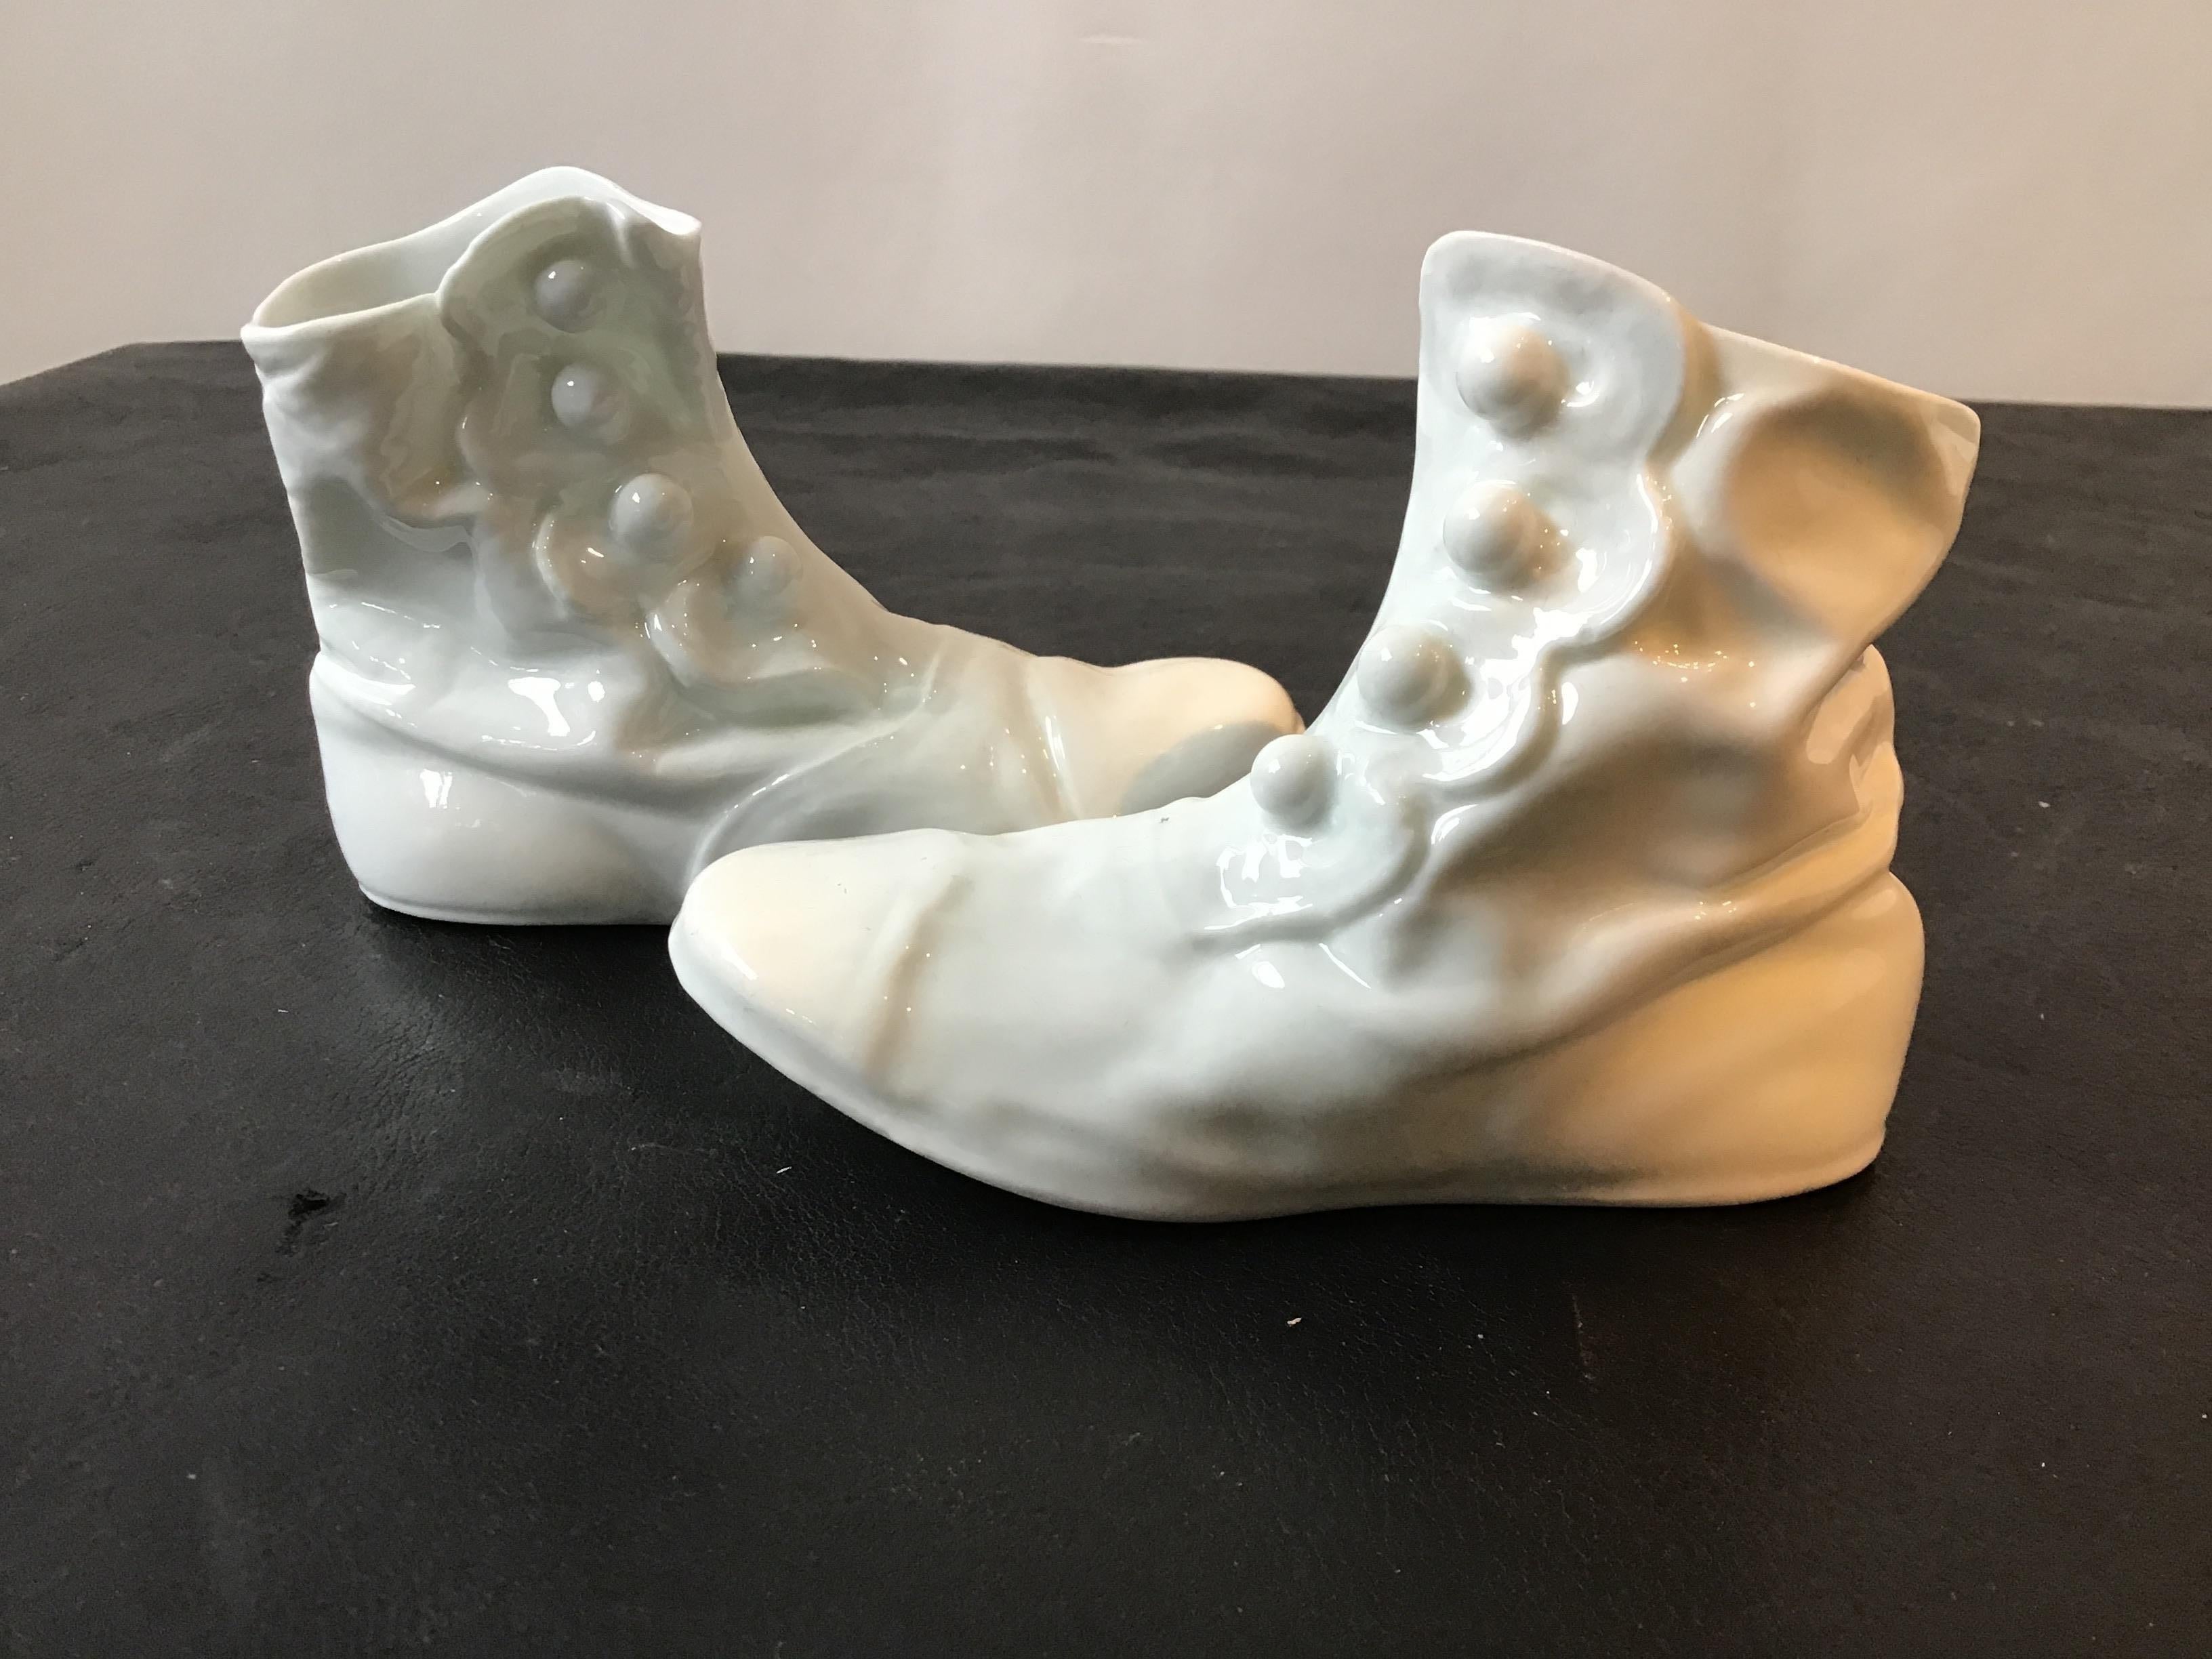 One pair of ceramic boots by Spin Ceramics. New.